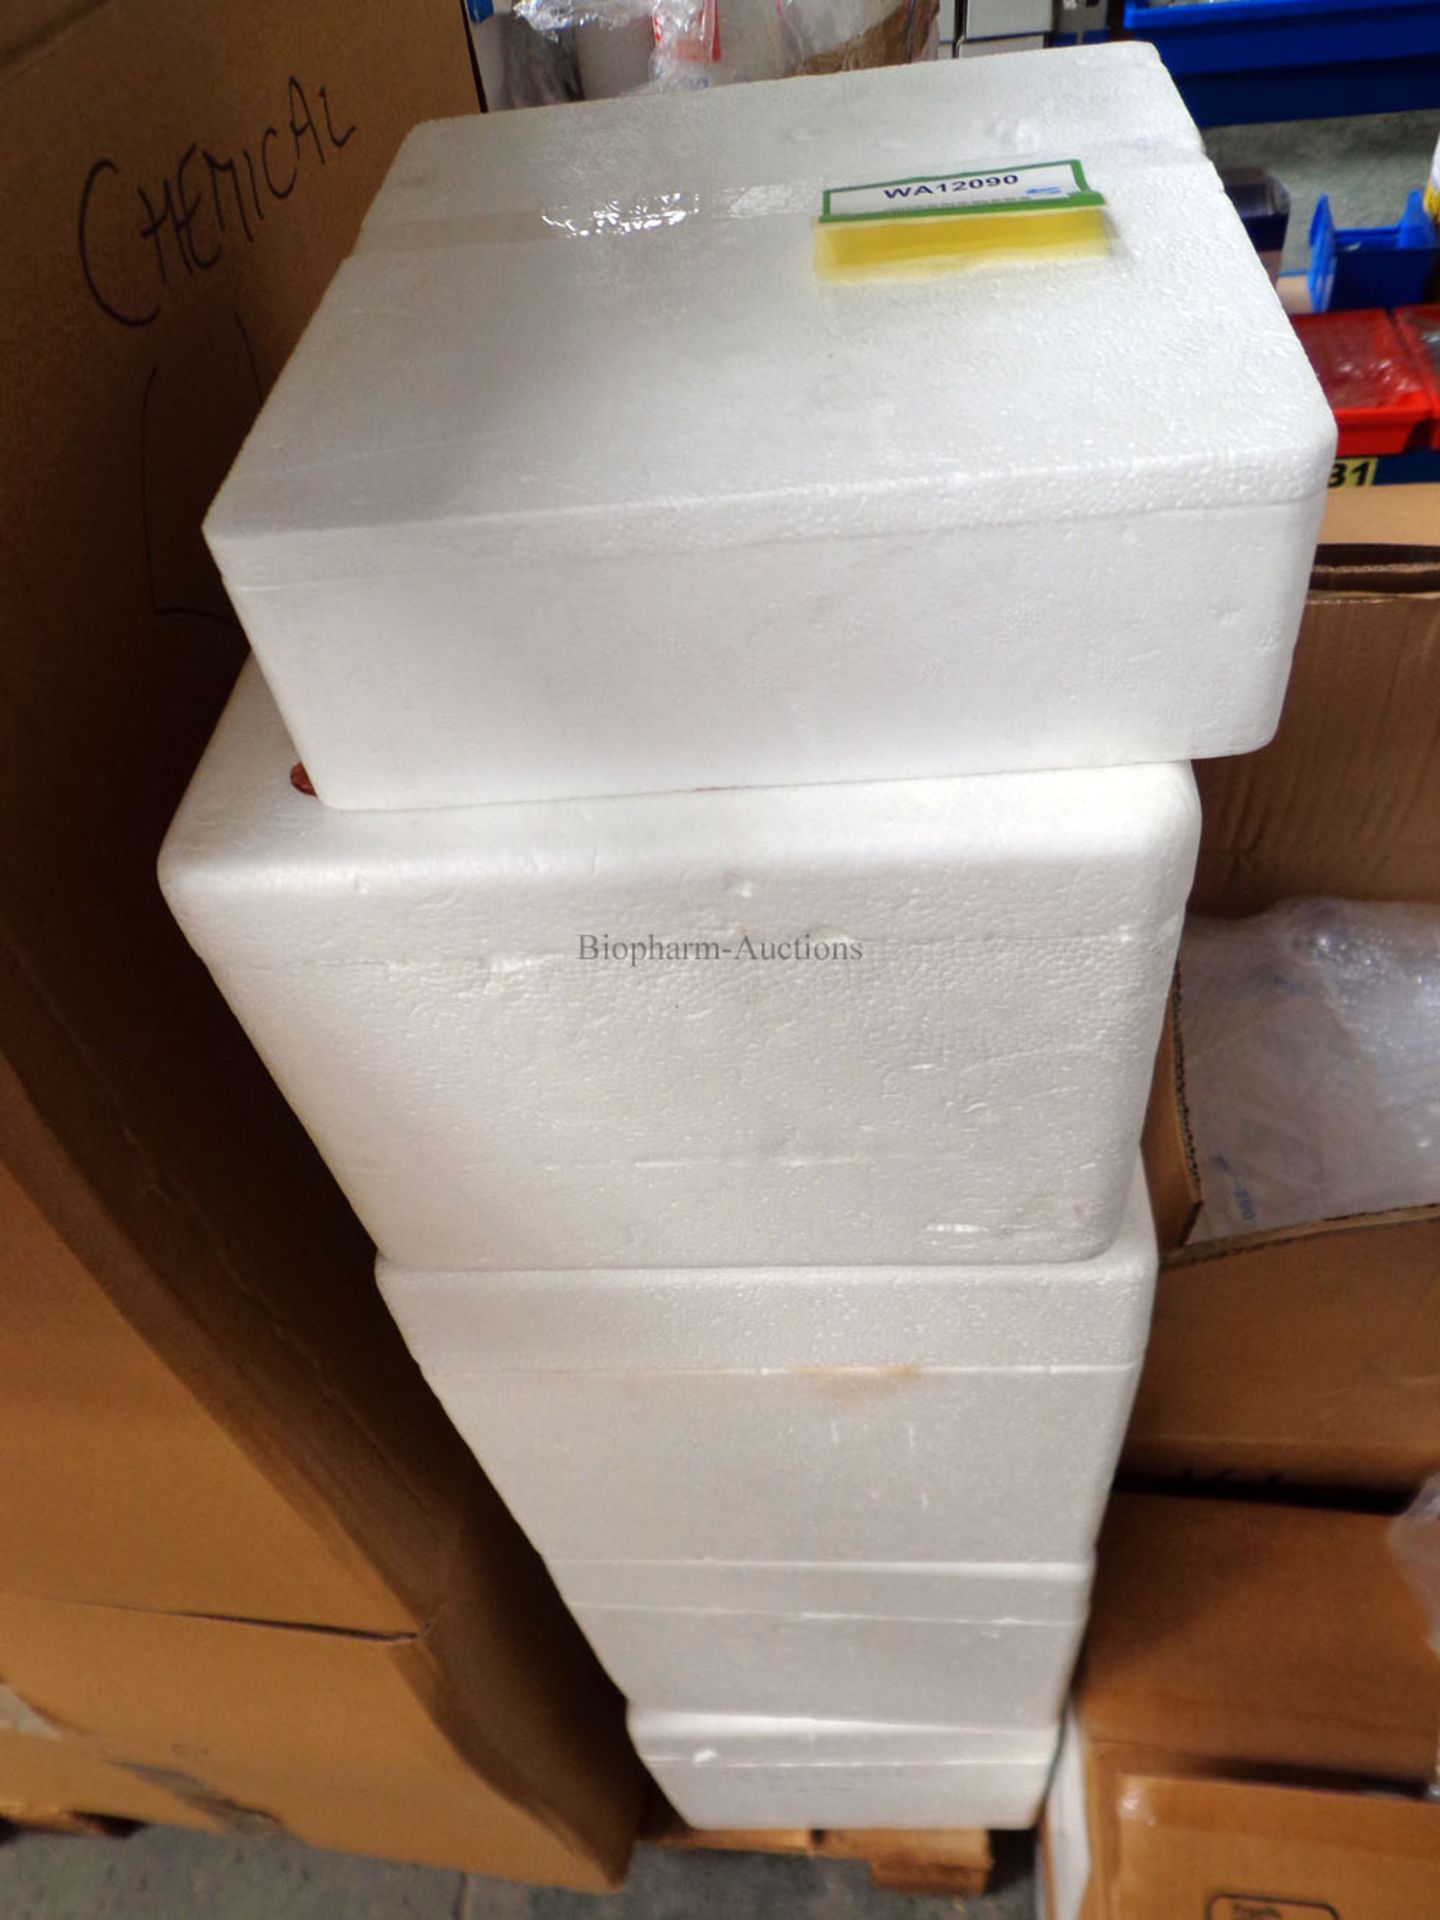 5 x Polystyrene packing containers (Re: WA12090)